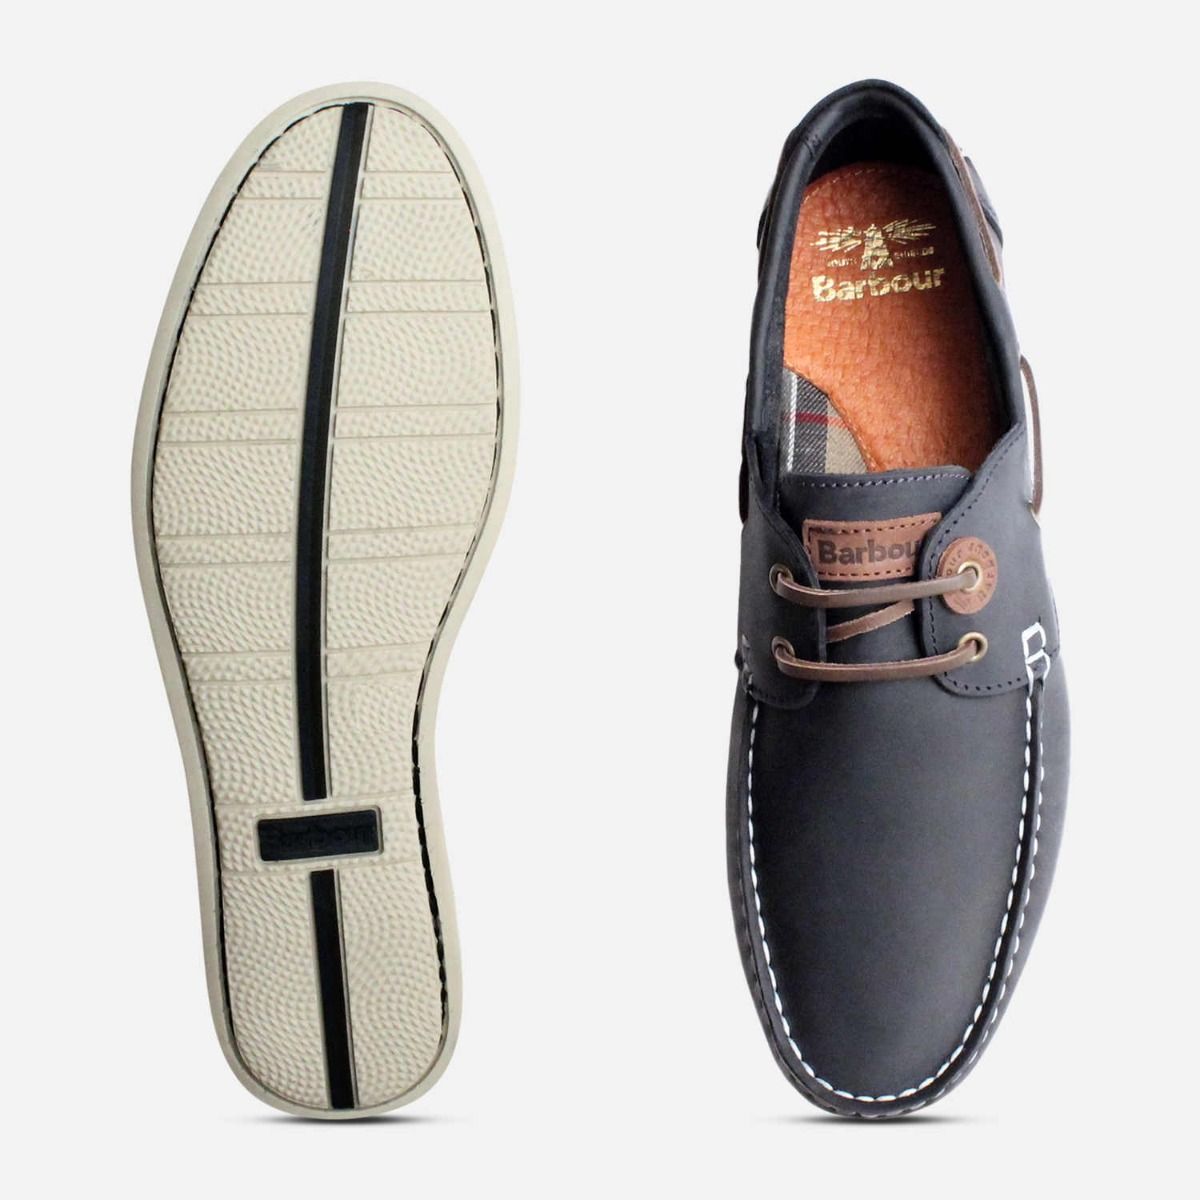 Barbour Capstan Navy Blue & White Boat Shoes